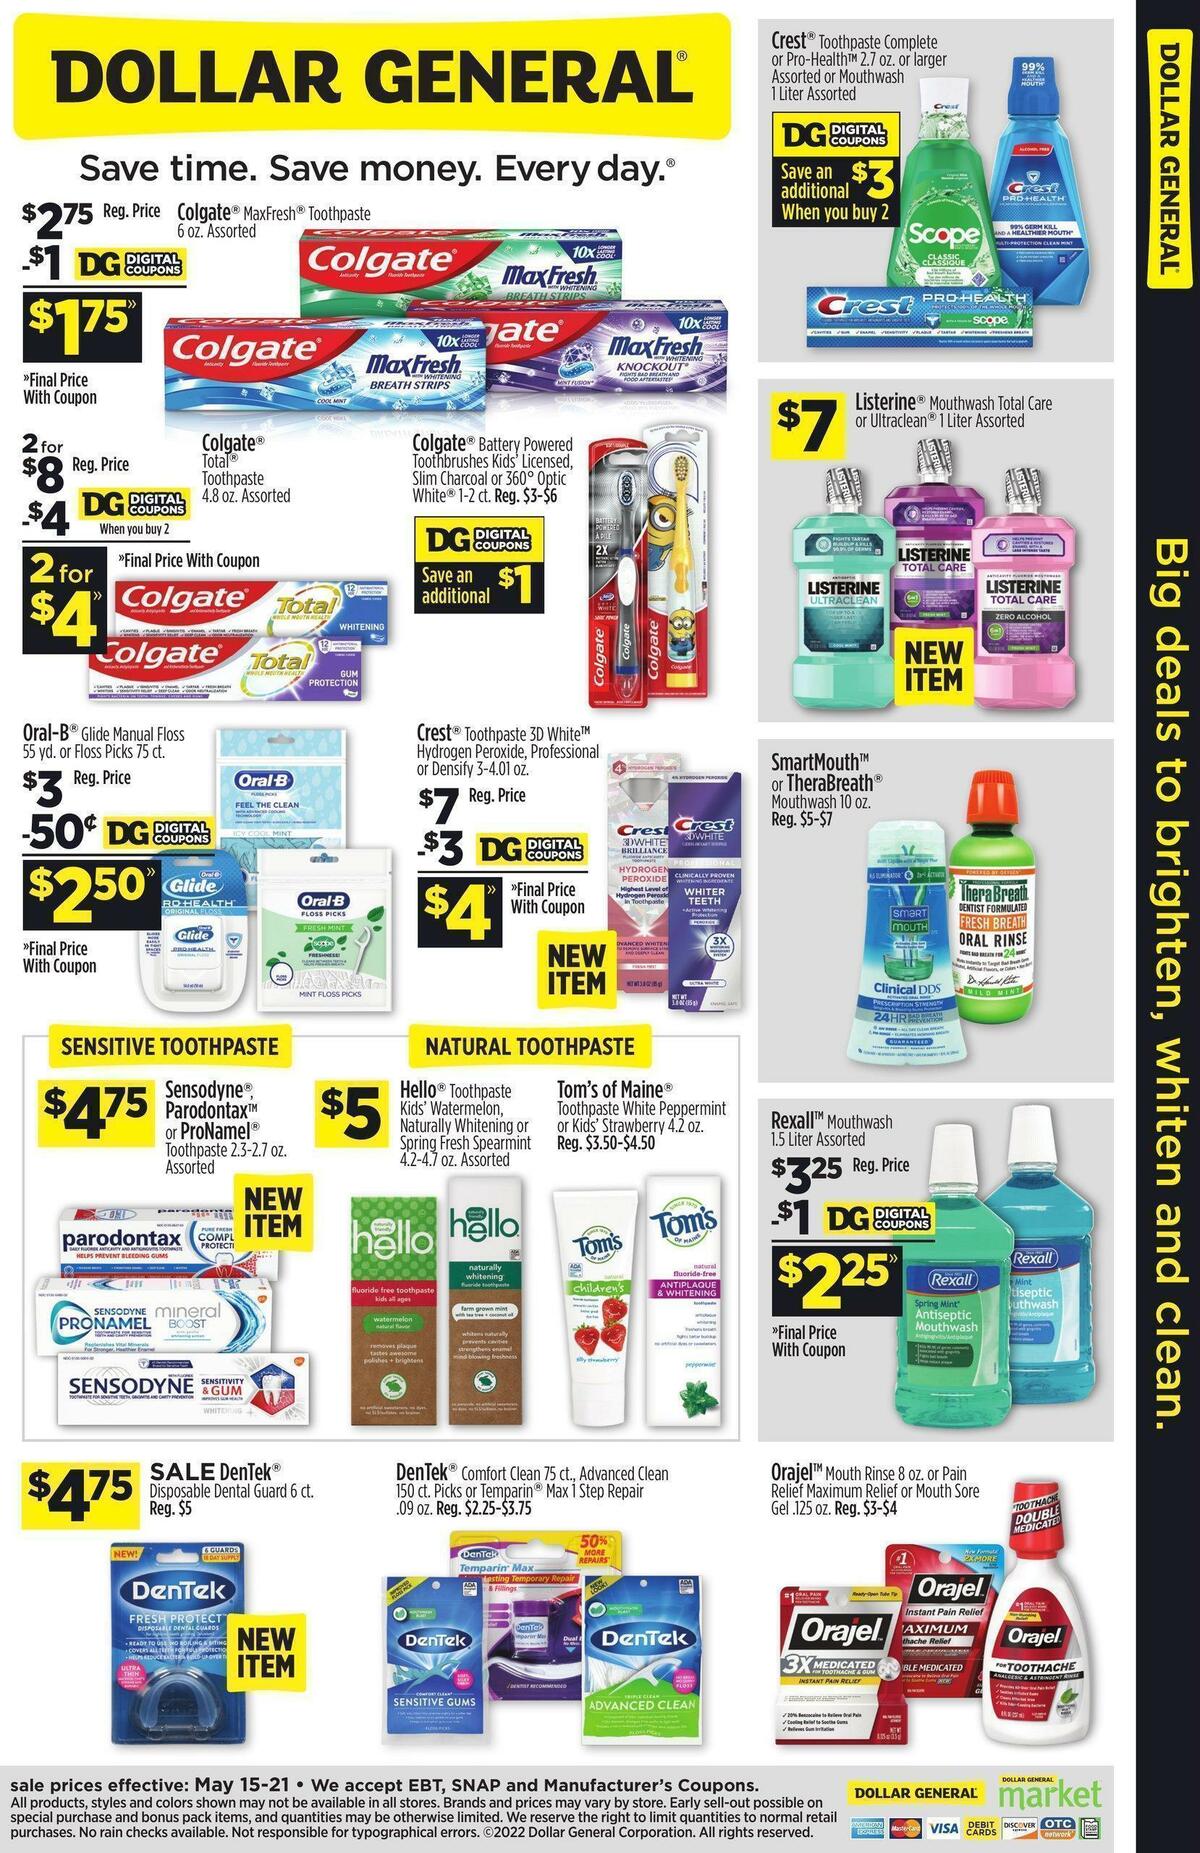 Dollar General Dental Deals Weekly Ad from May 15